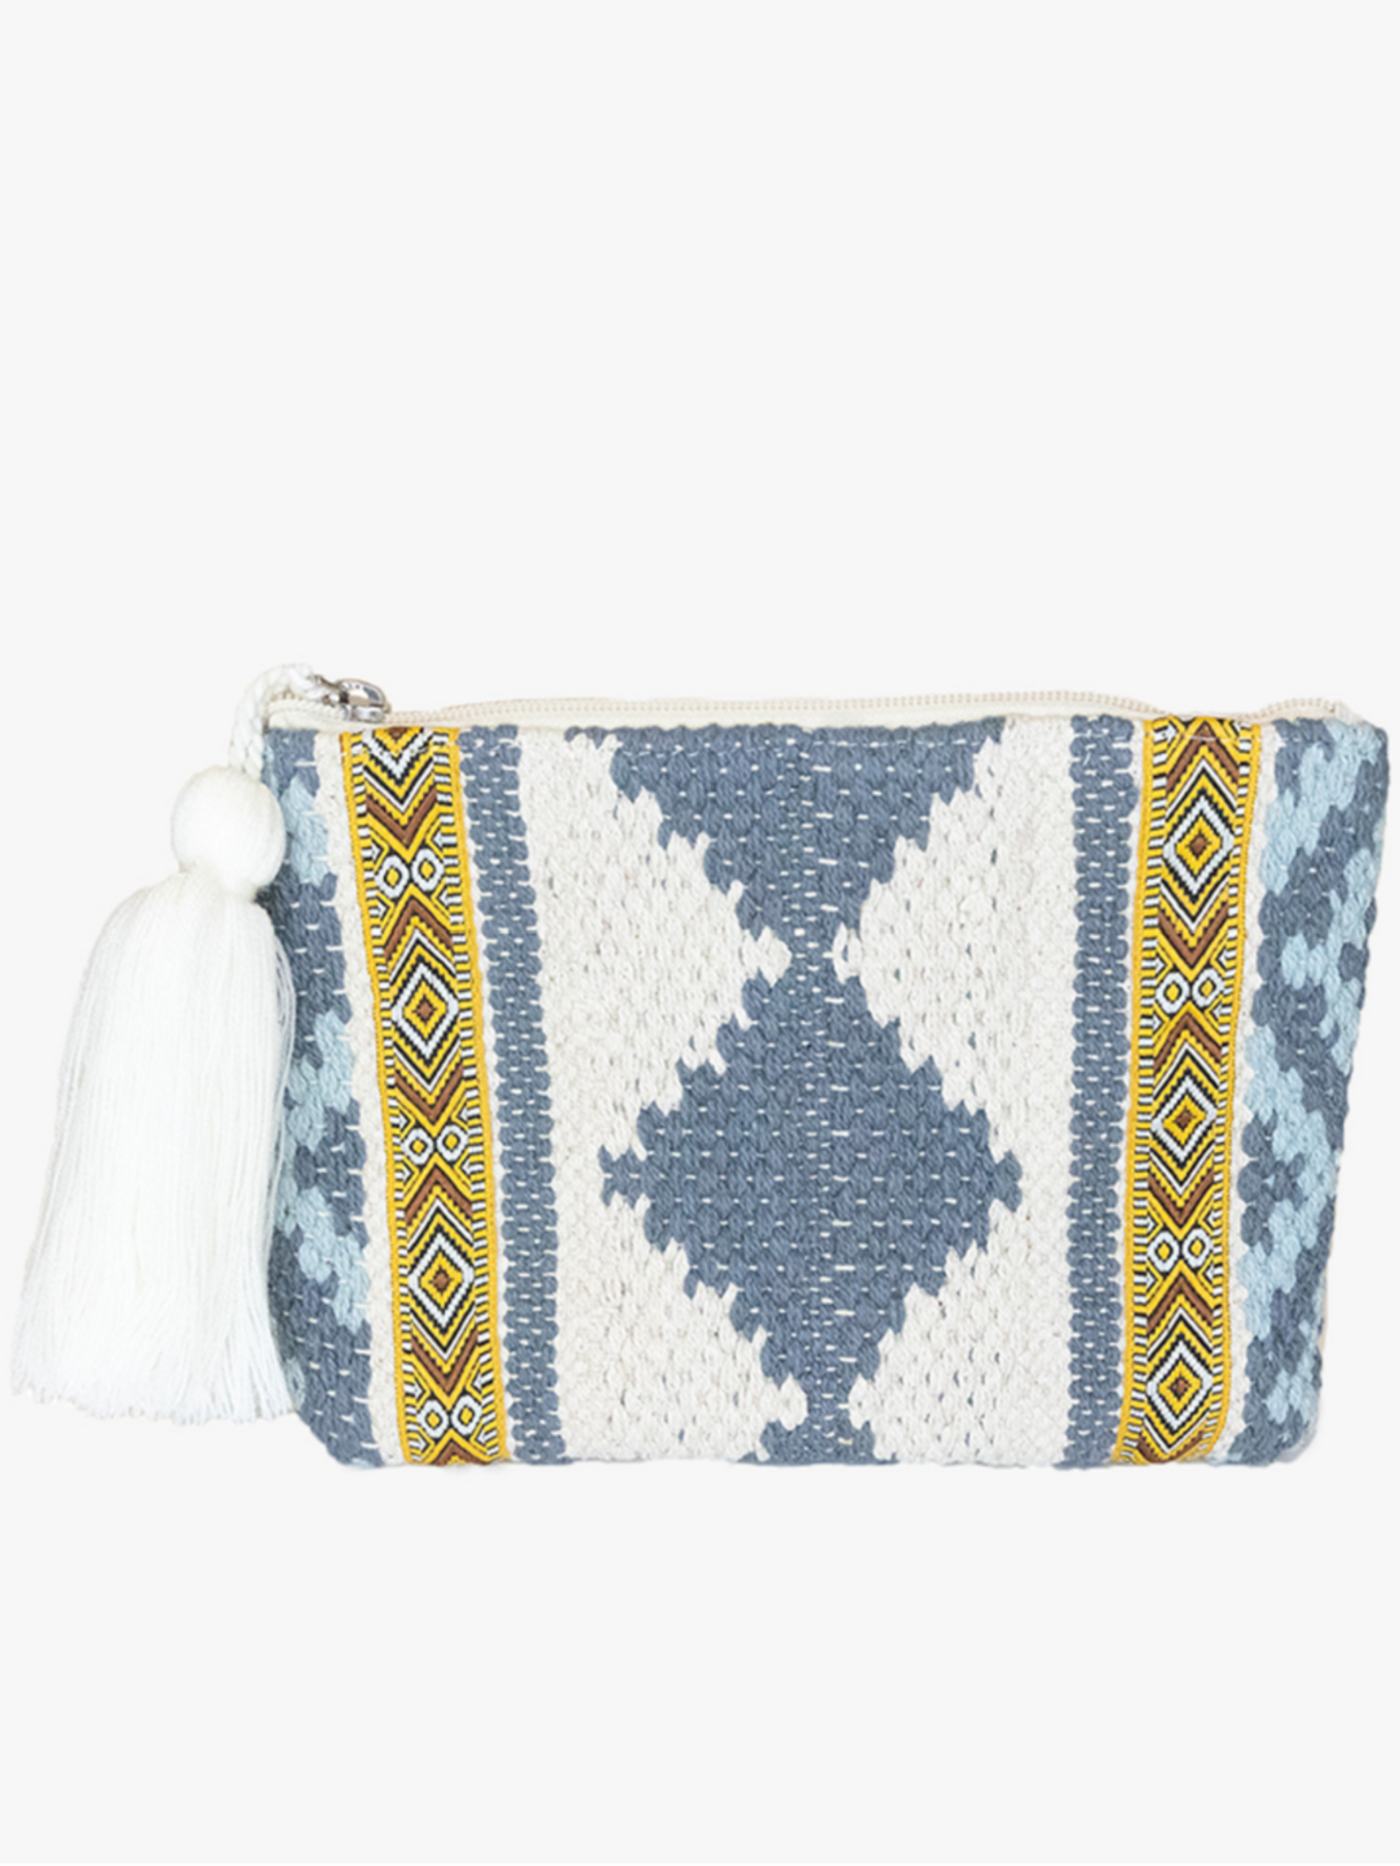 Adalaide Handwoven Pouch, Blue and Beige